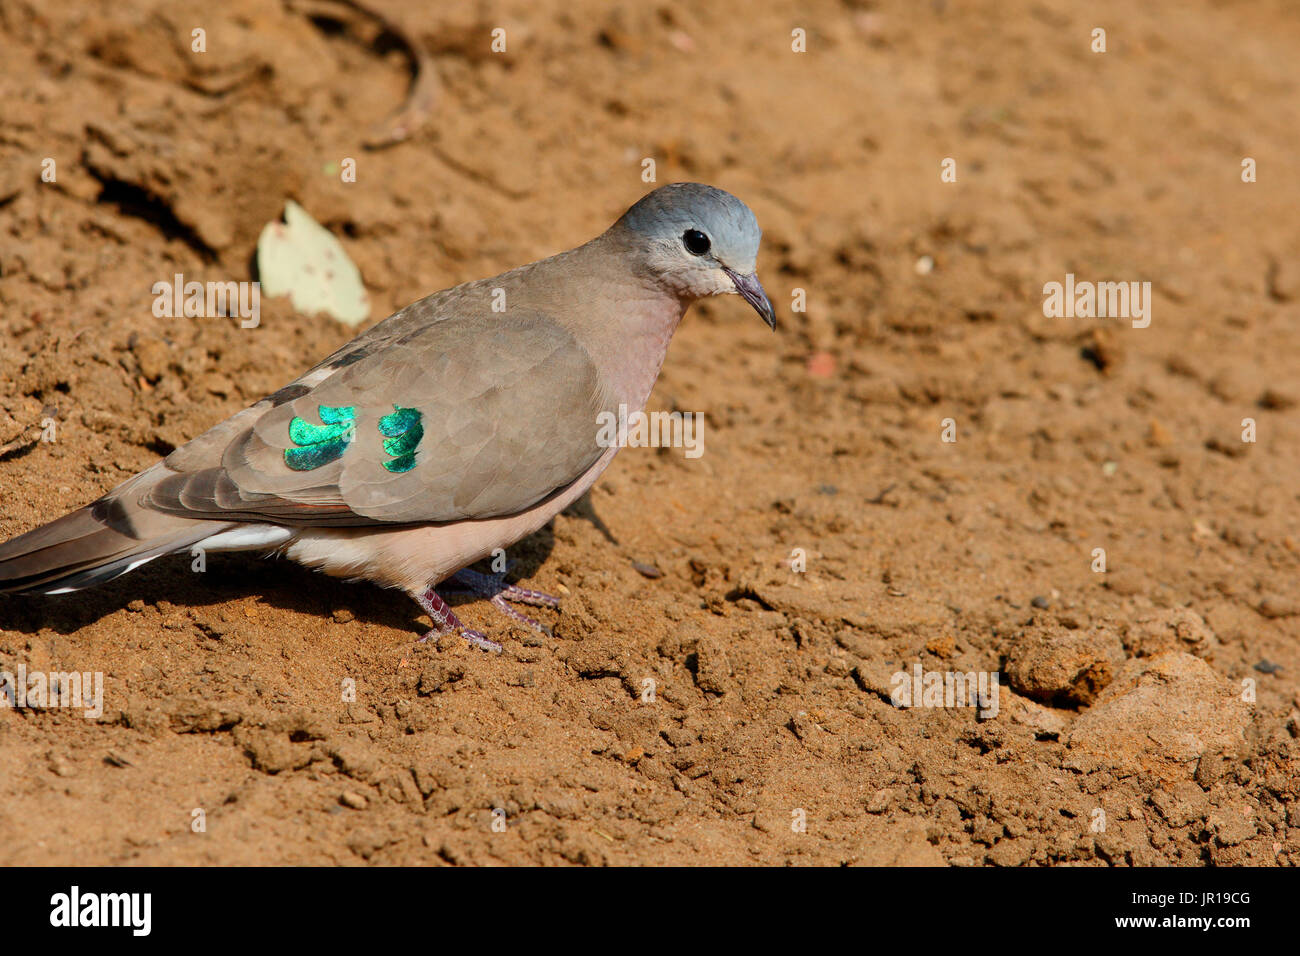 Emerald-spotted wood dove (Turtur chalcospilos) on ground, South Africa Stock Photo